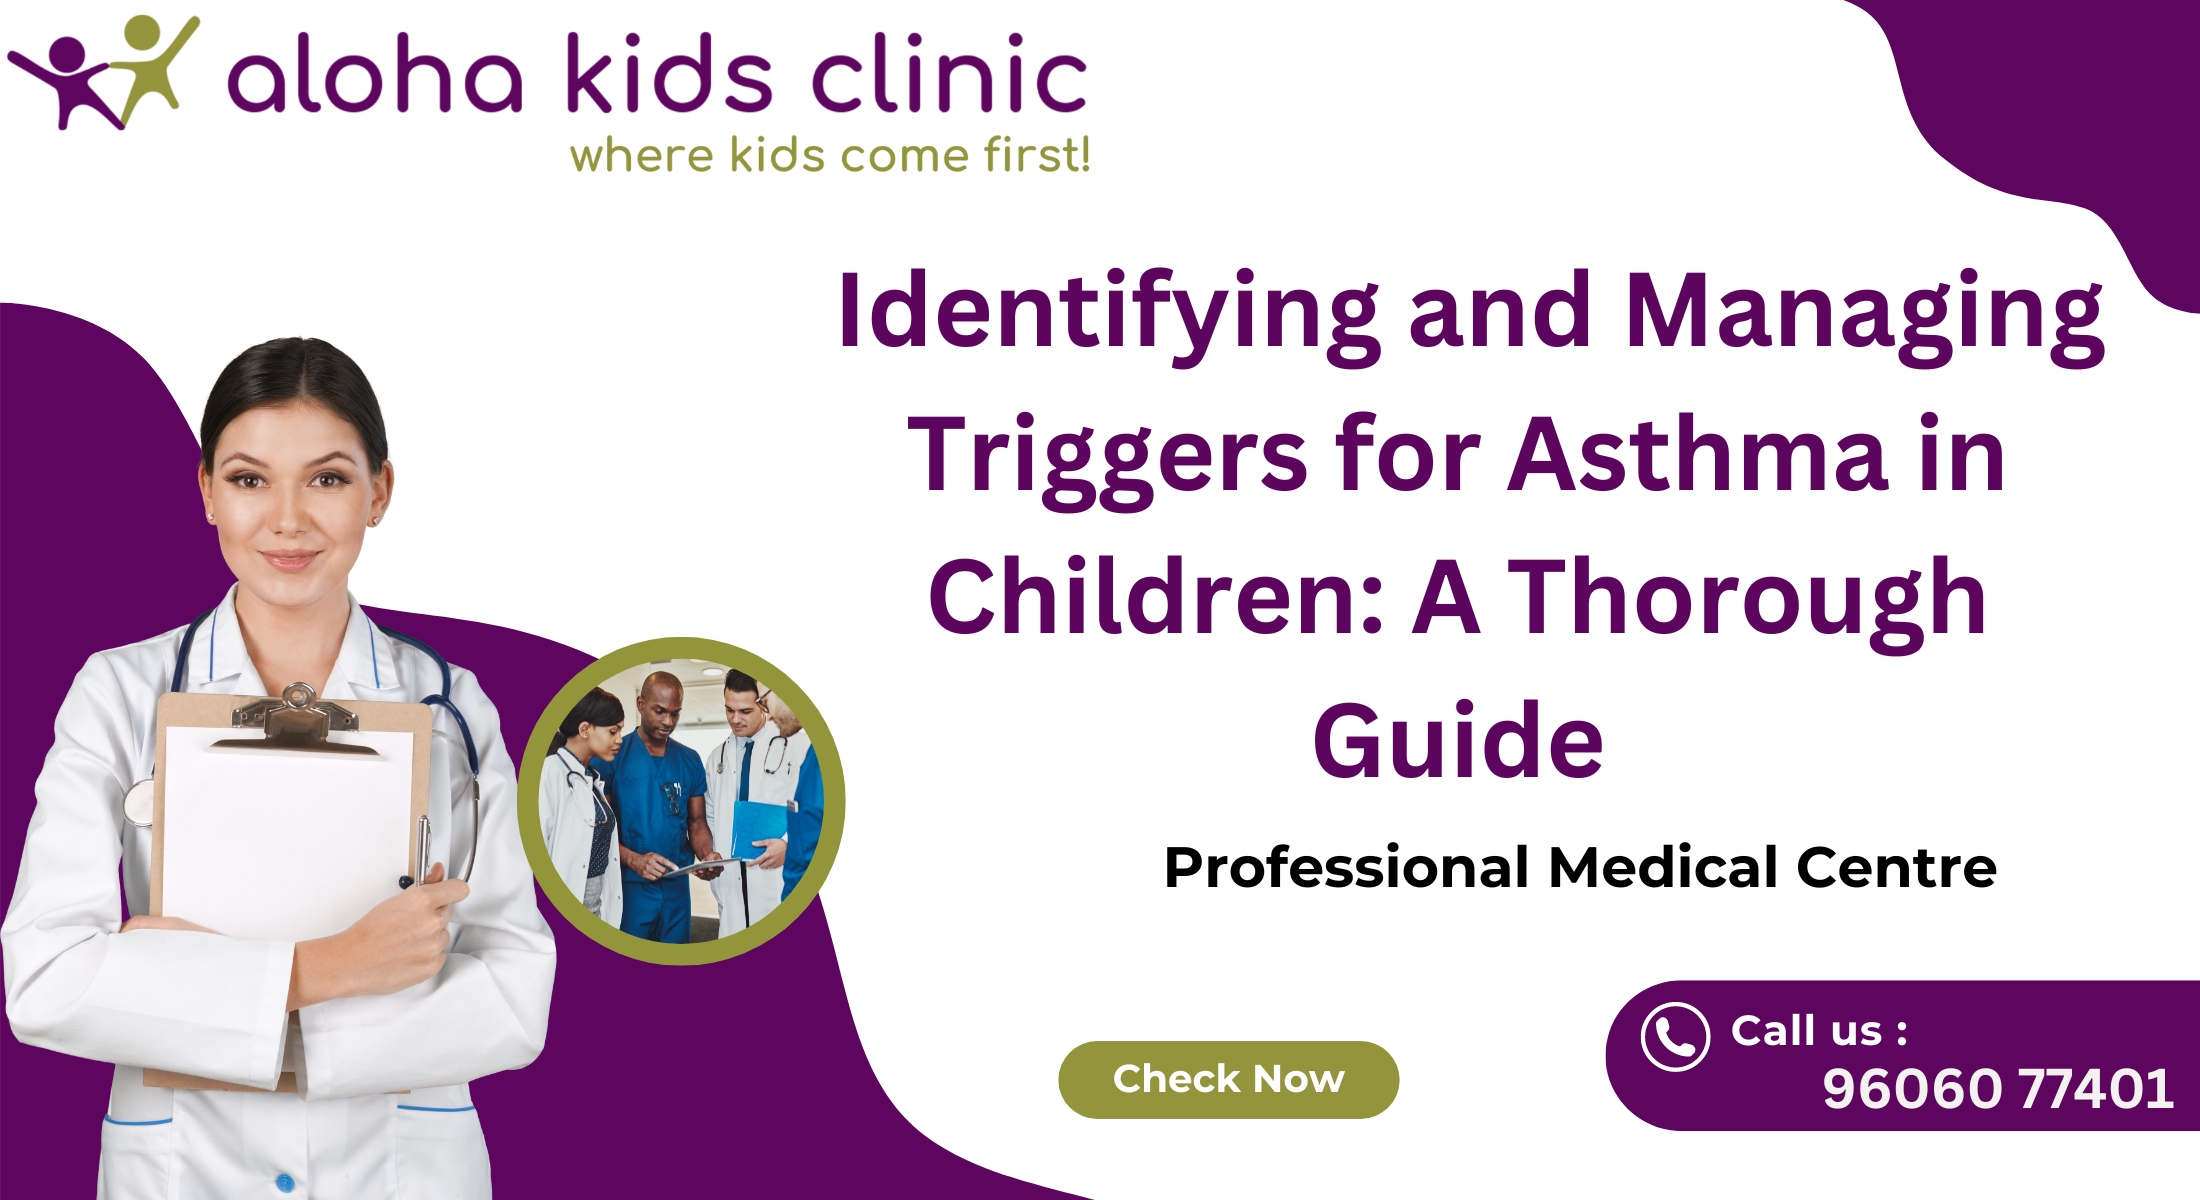 Identifying and Managing Triggers for Asthma in Children: A Thorough Guide